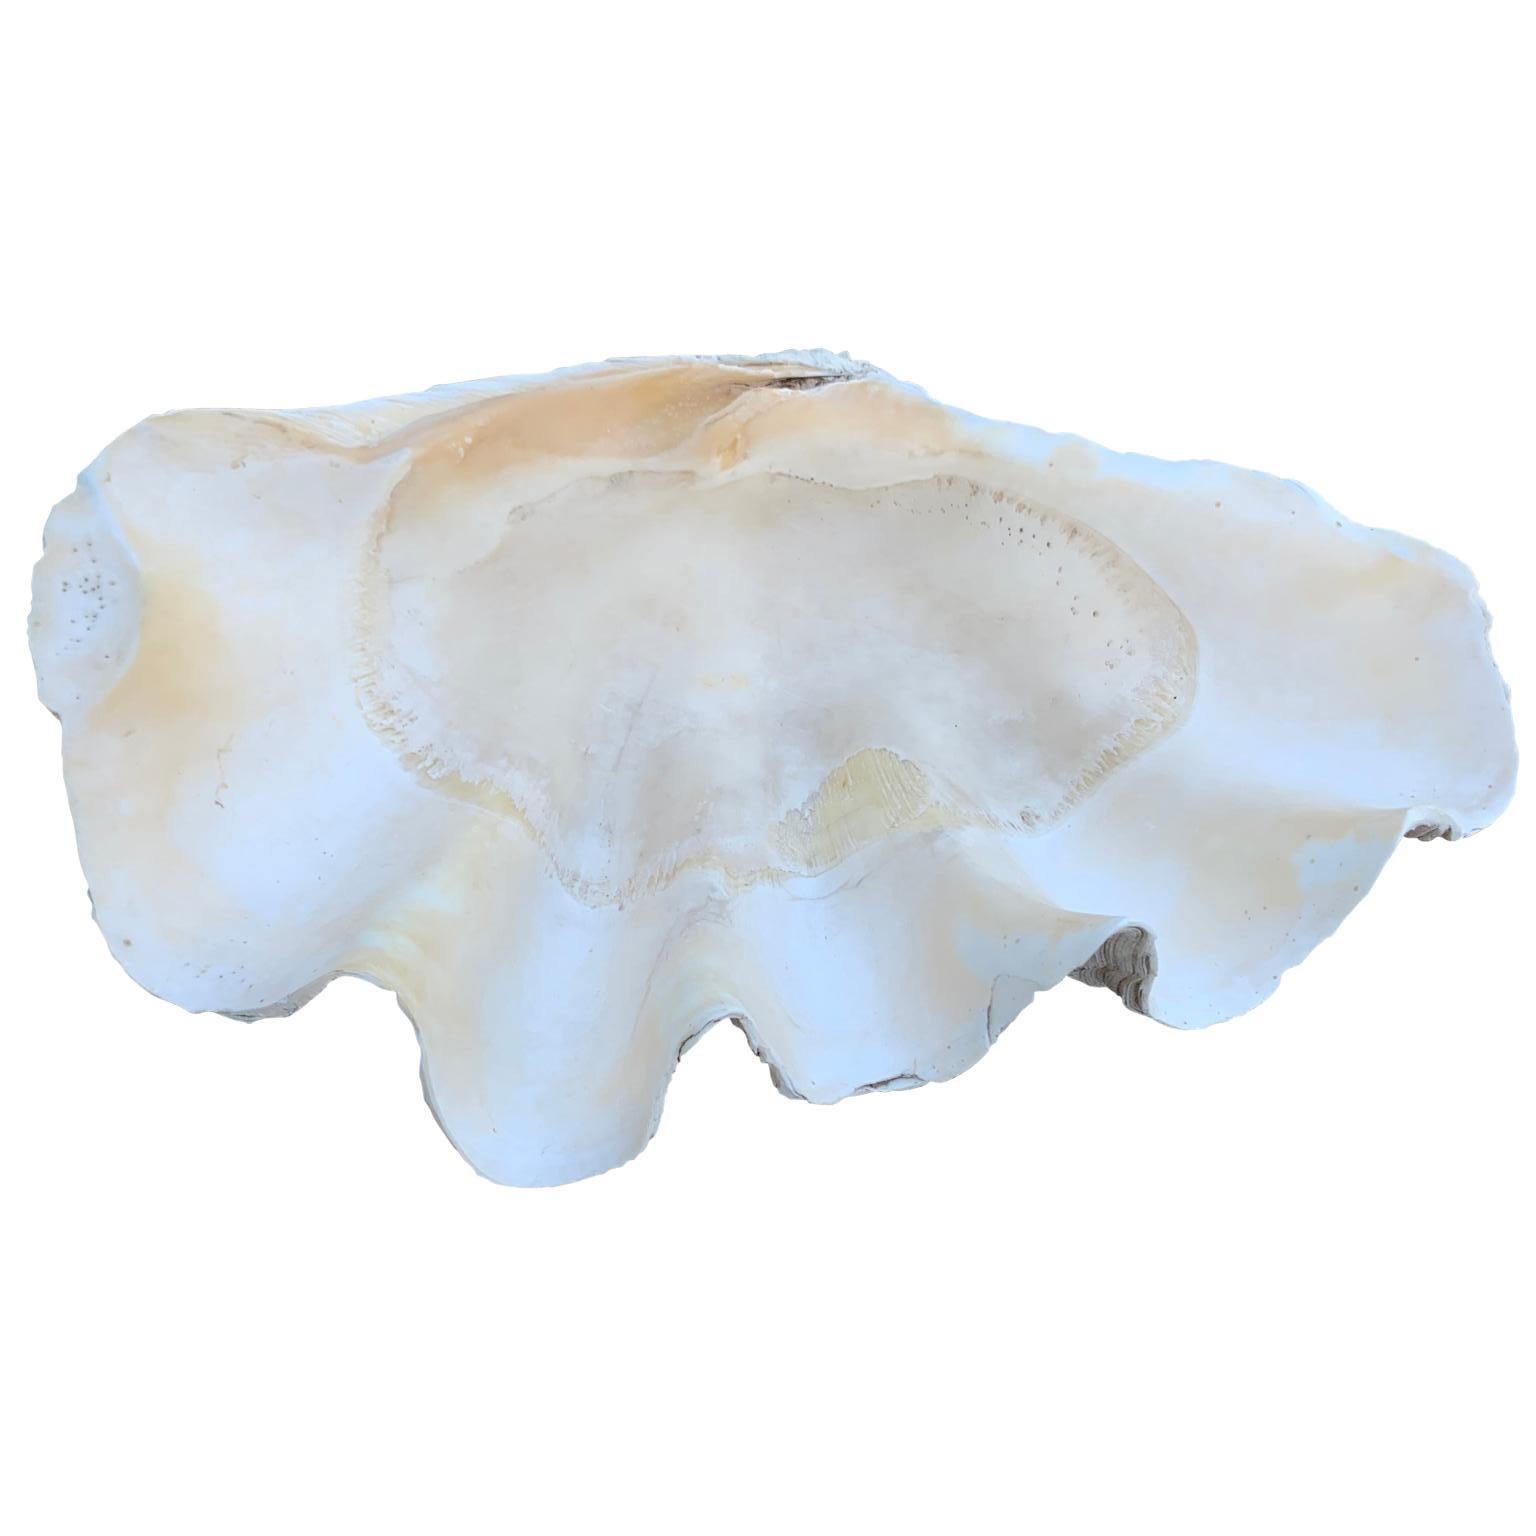 Organic Modern Mid Size South Pacific Tridacna Gigas Clam Shell with High Elbows